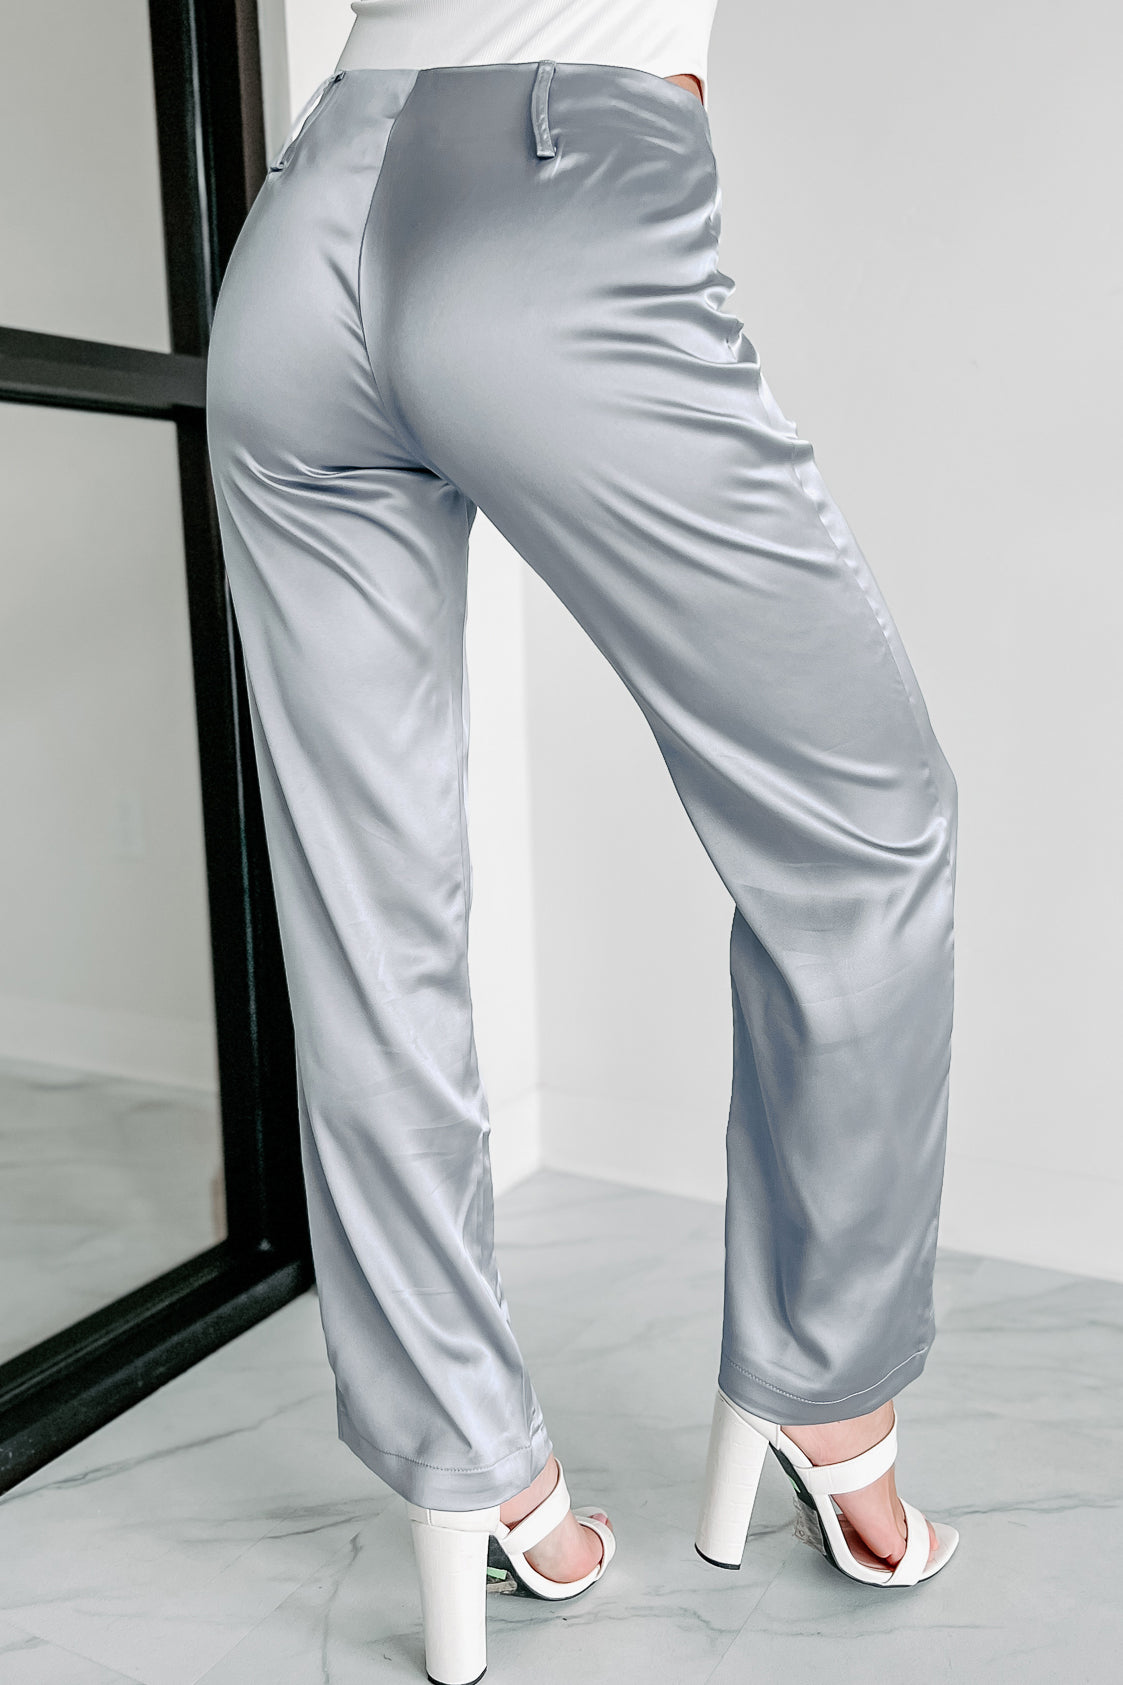 Scott & Taylor | Ice Blue Linen Look Trousers | SuitDirect.co.uk